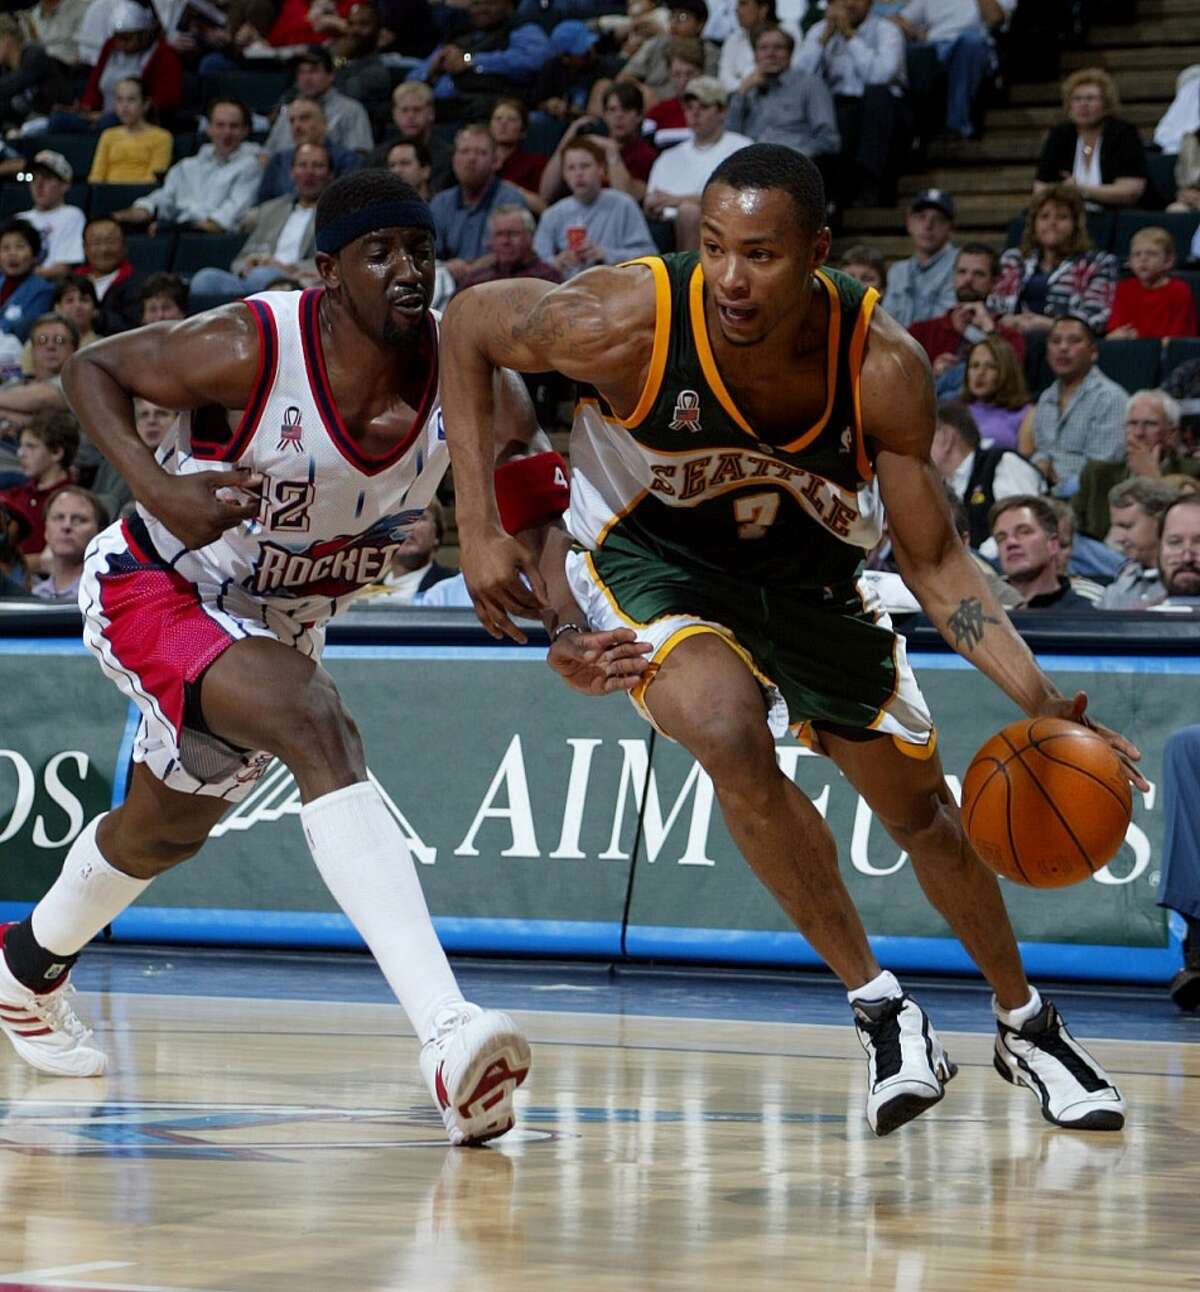 Rashard Lewis Draft year: 1998 Drafted by: Seattle SuperSonics Overall selection: No. 32 School: Elsik High School